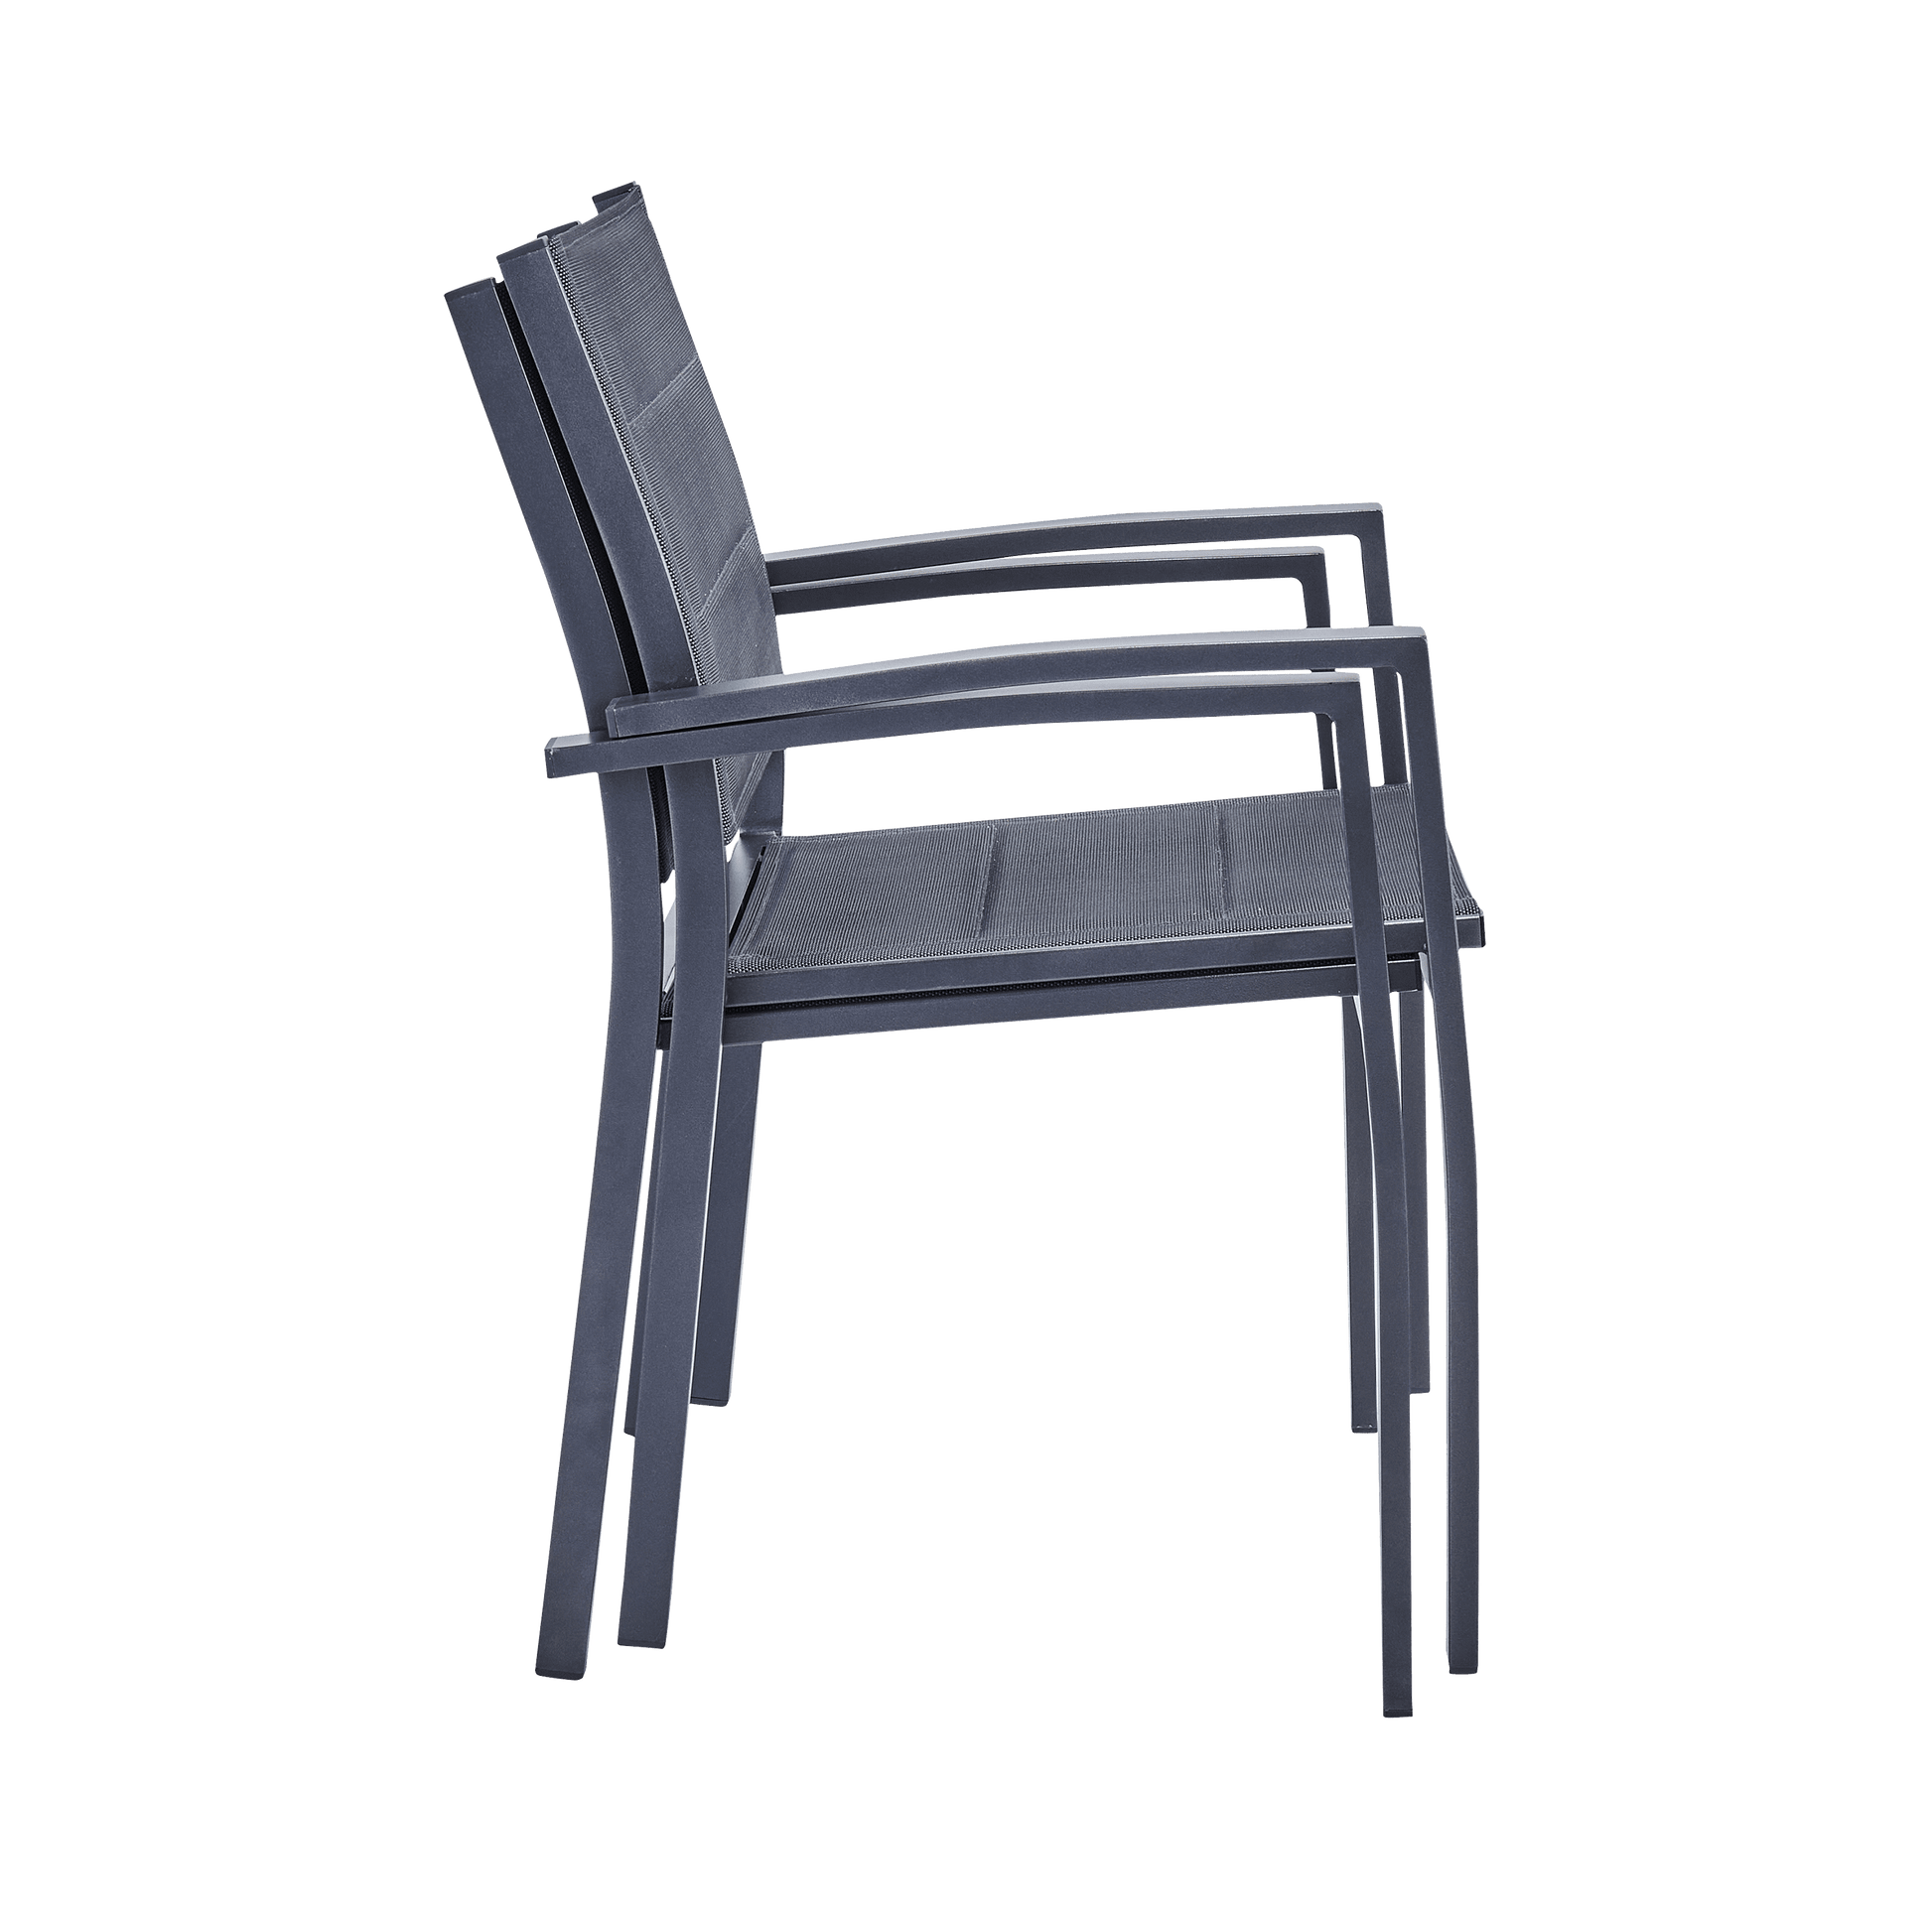 ORION BETA II NATERIAL Chair with armrests aluminum and textilene, padded, anthracite - best price from Maltashopper.com BR500013573